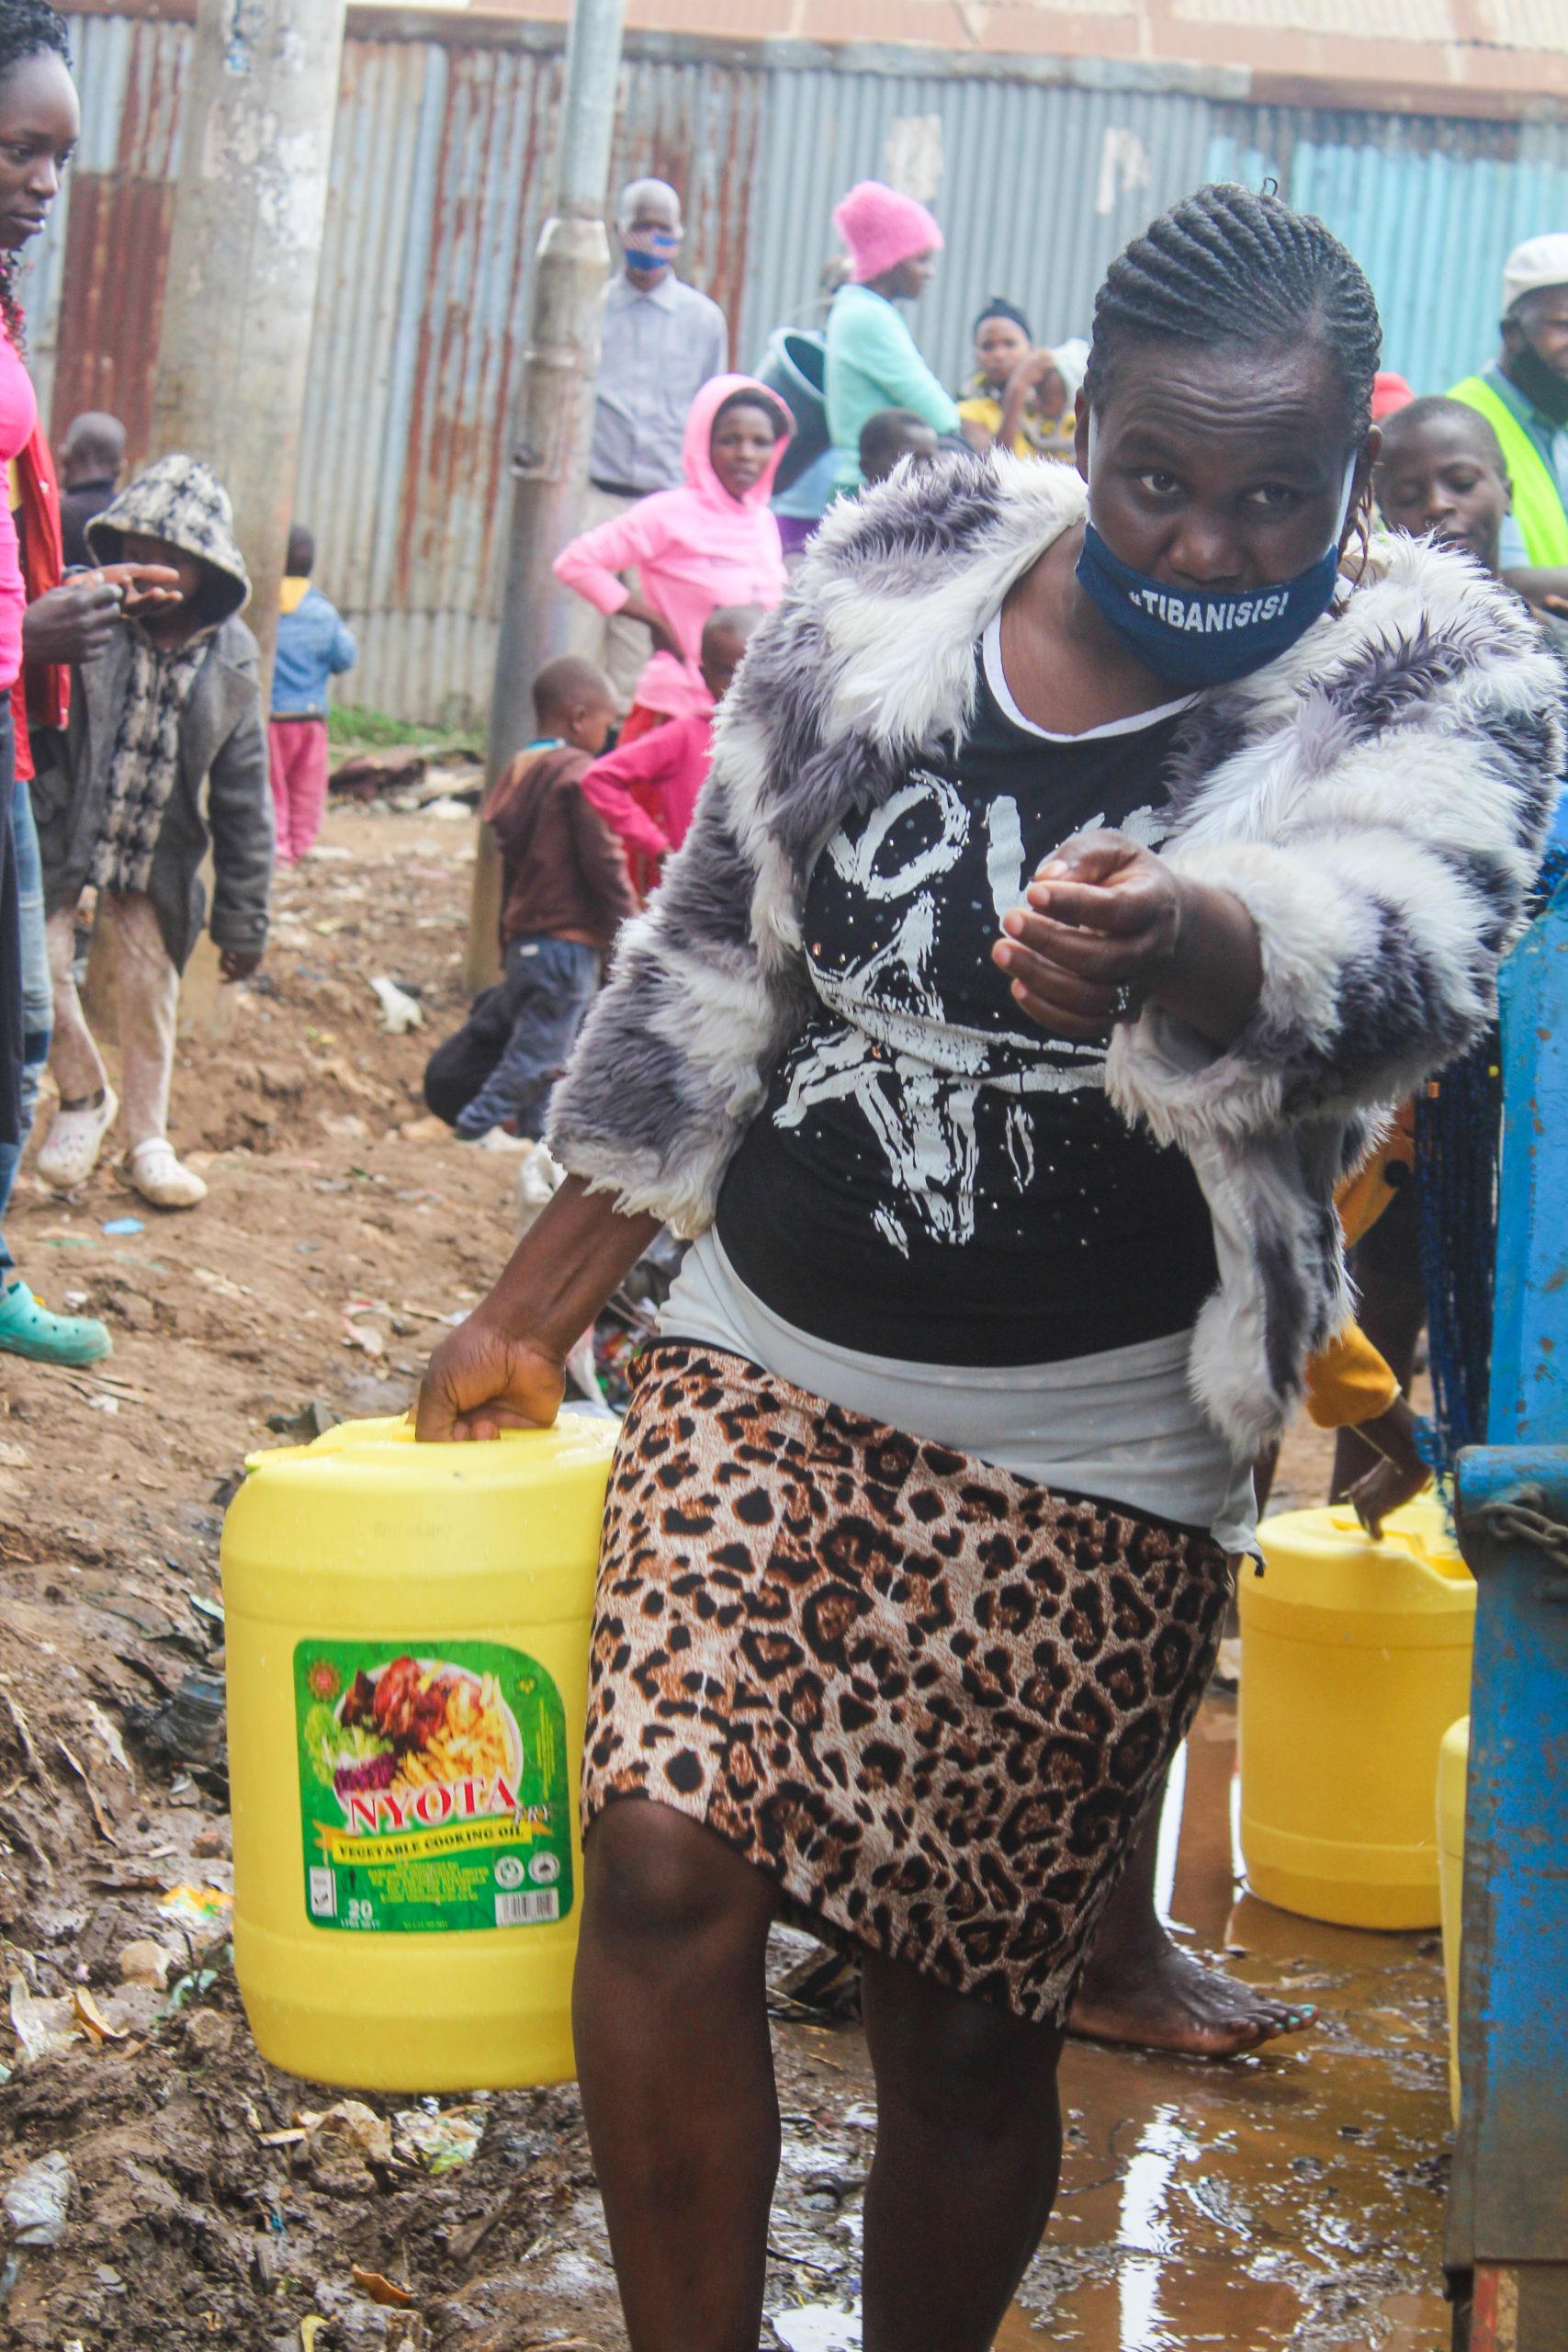 RHYCO’s Okoa Mtaa Initiative Working With Communities to Provide Clean Water to Fight COVID19